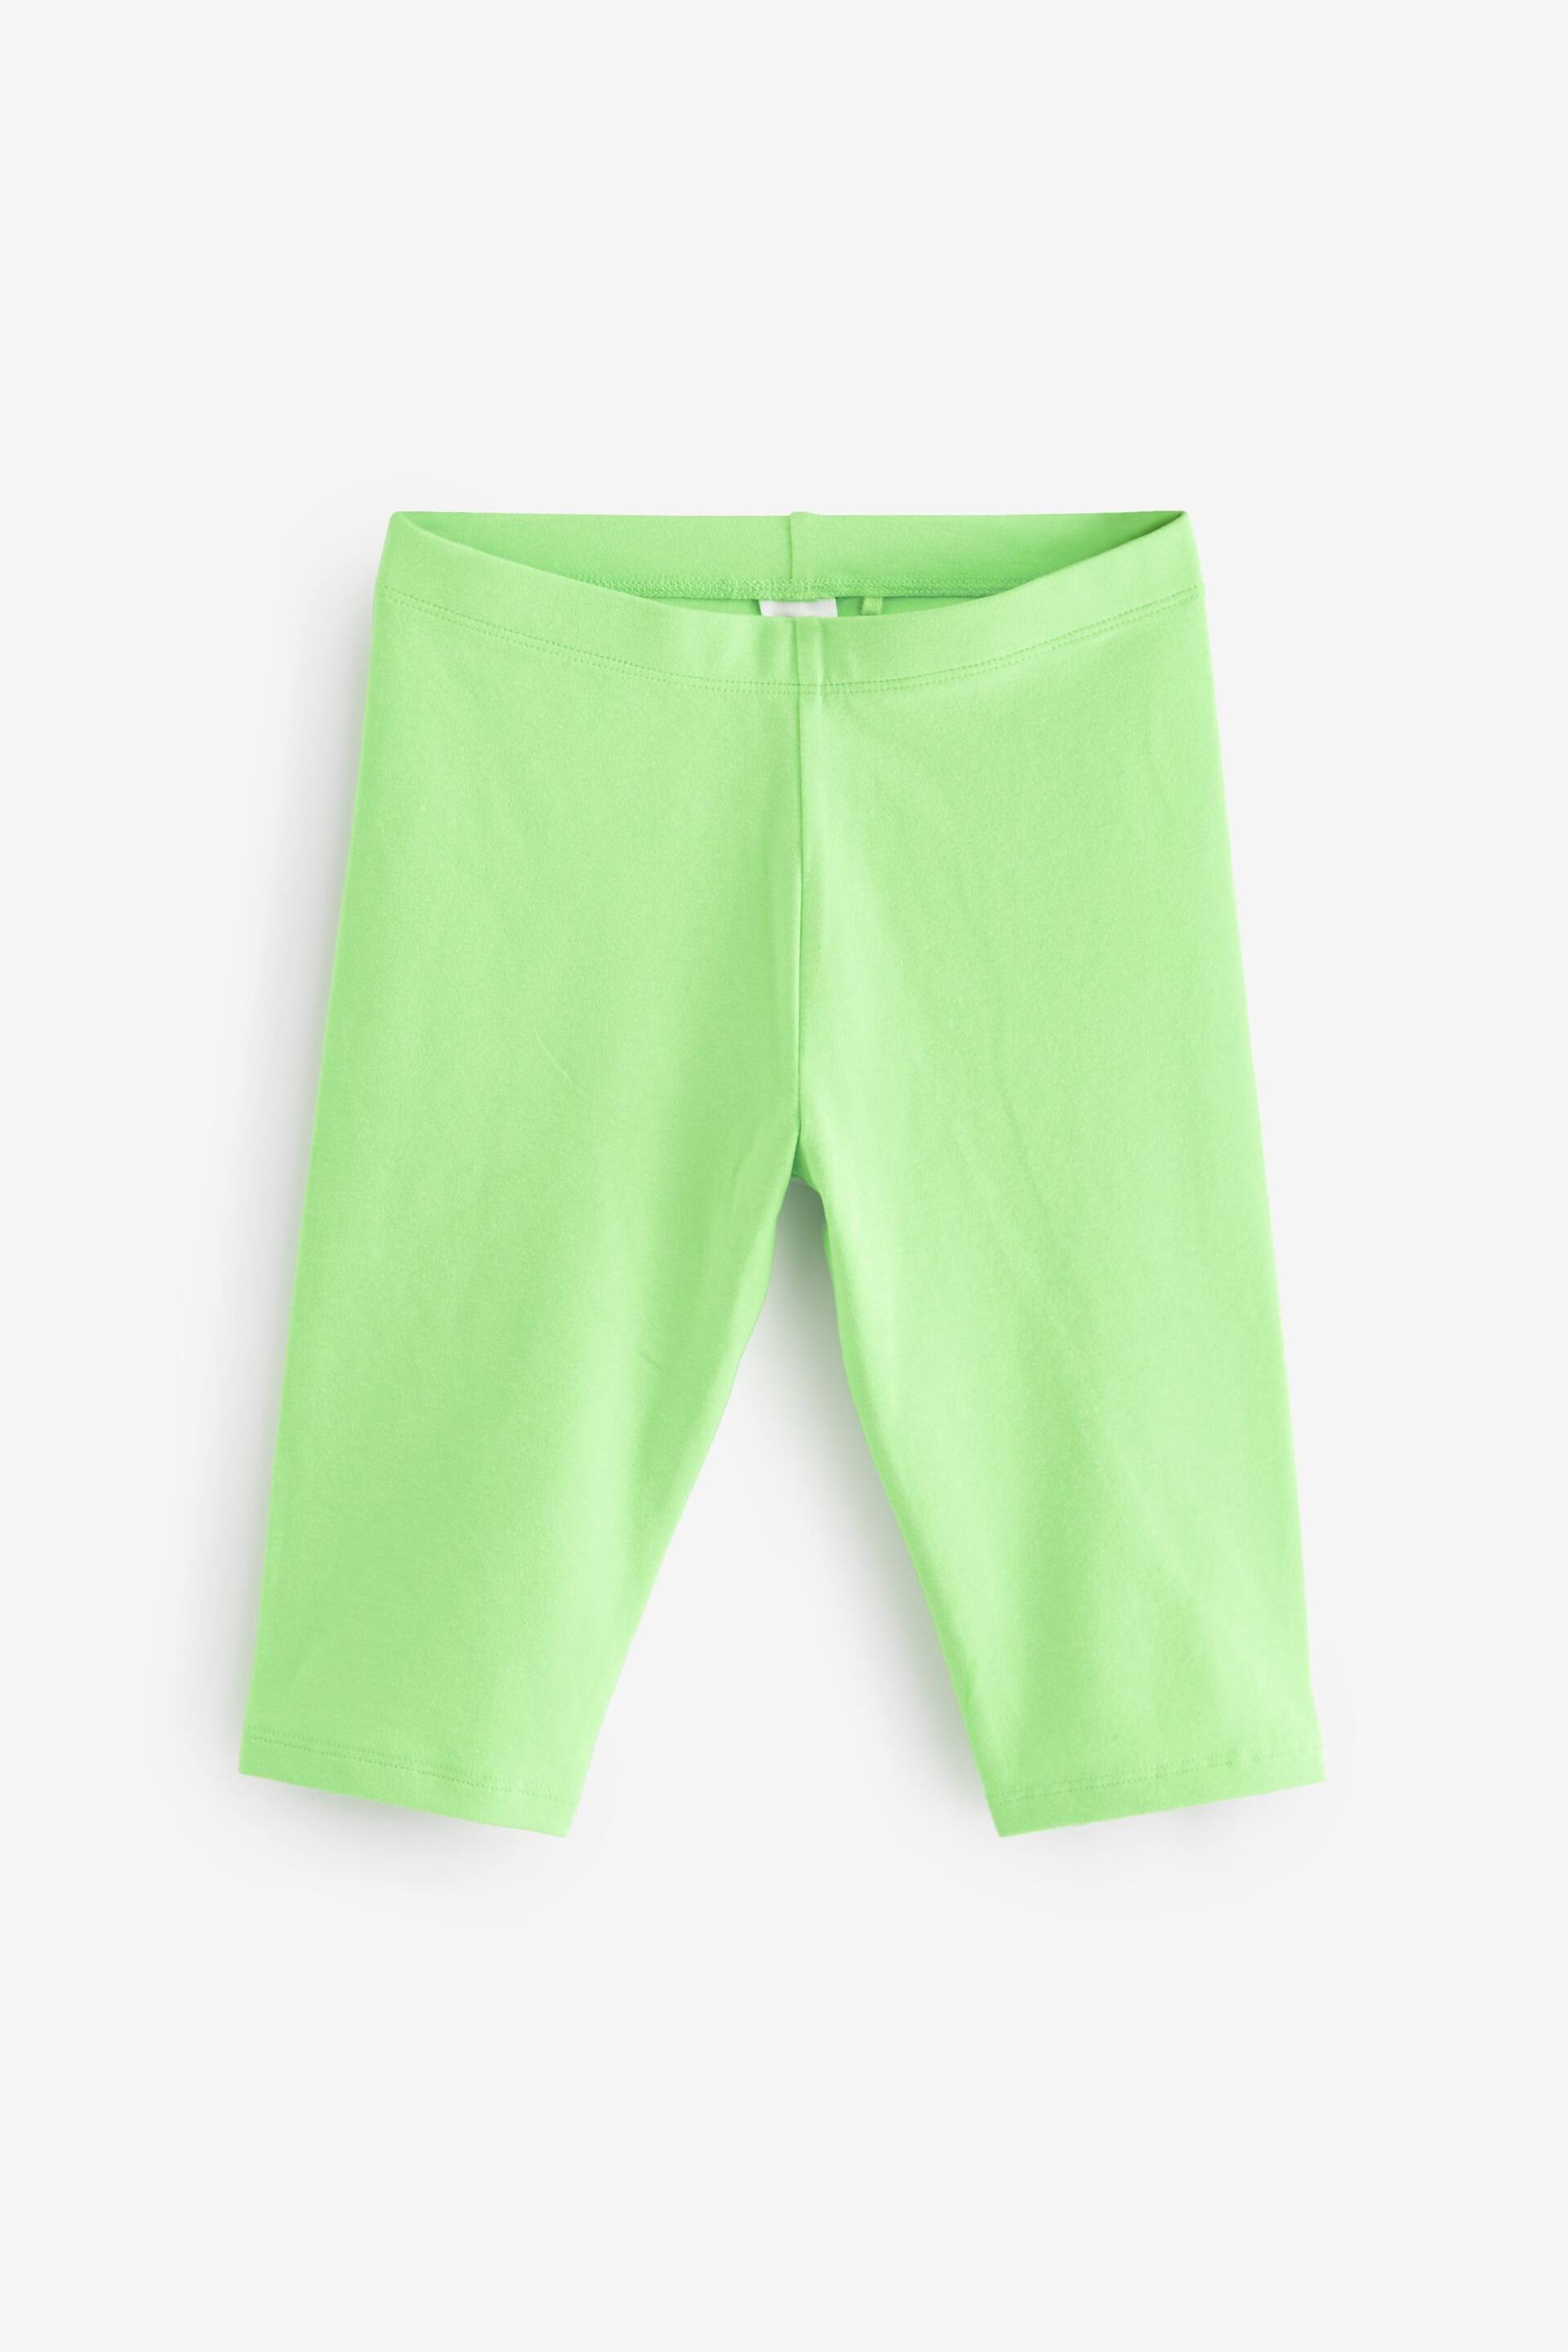 Pink/ Black Lime Green Bright Tropical Cropped Leggings 4 Pack (3-16yrs) - Image 3 of 7